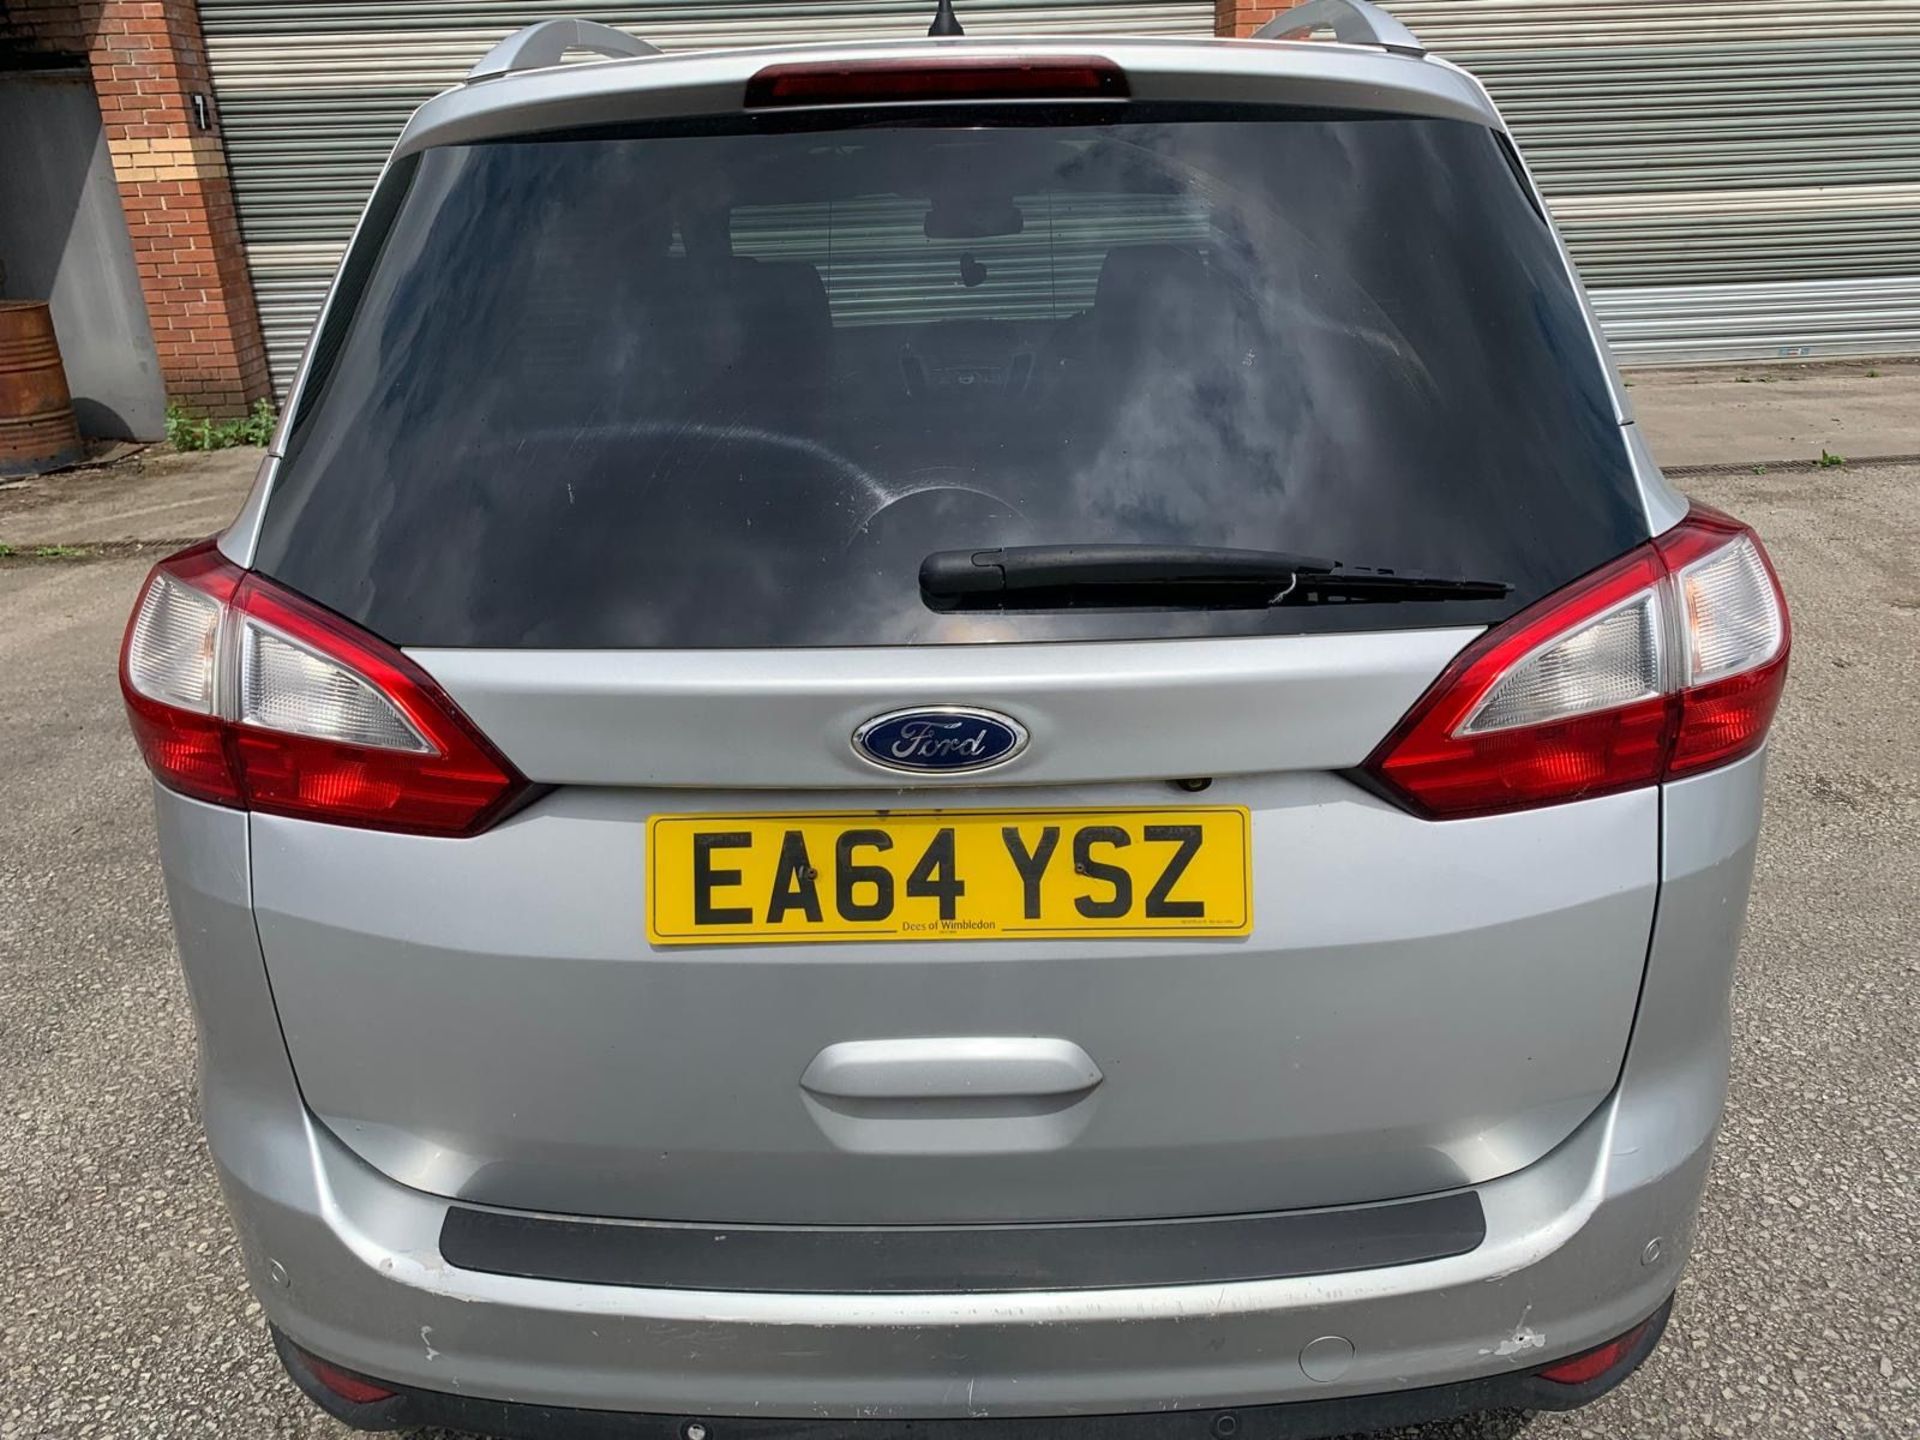 EA64 YSZ FORD GRAND C-MAX Silver Diesel First Registration: 12.11.14 Mot: 09.08.24 Mileage: 150, - Image 7 of 12